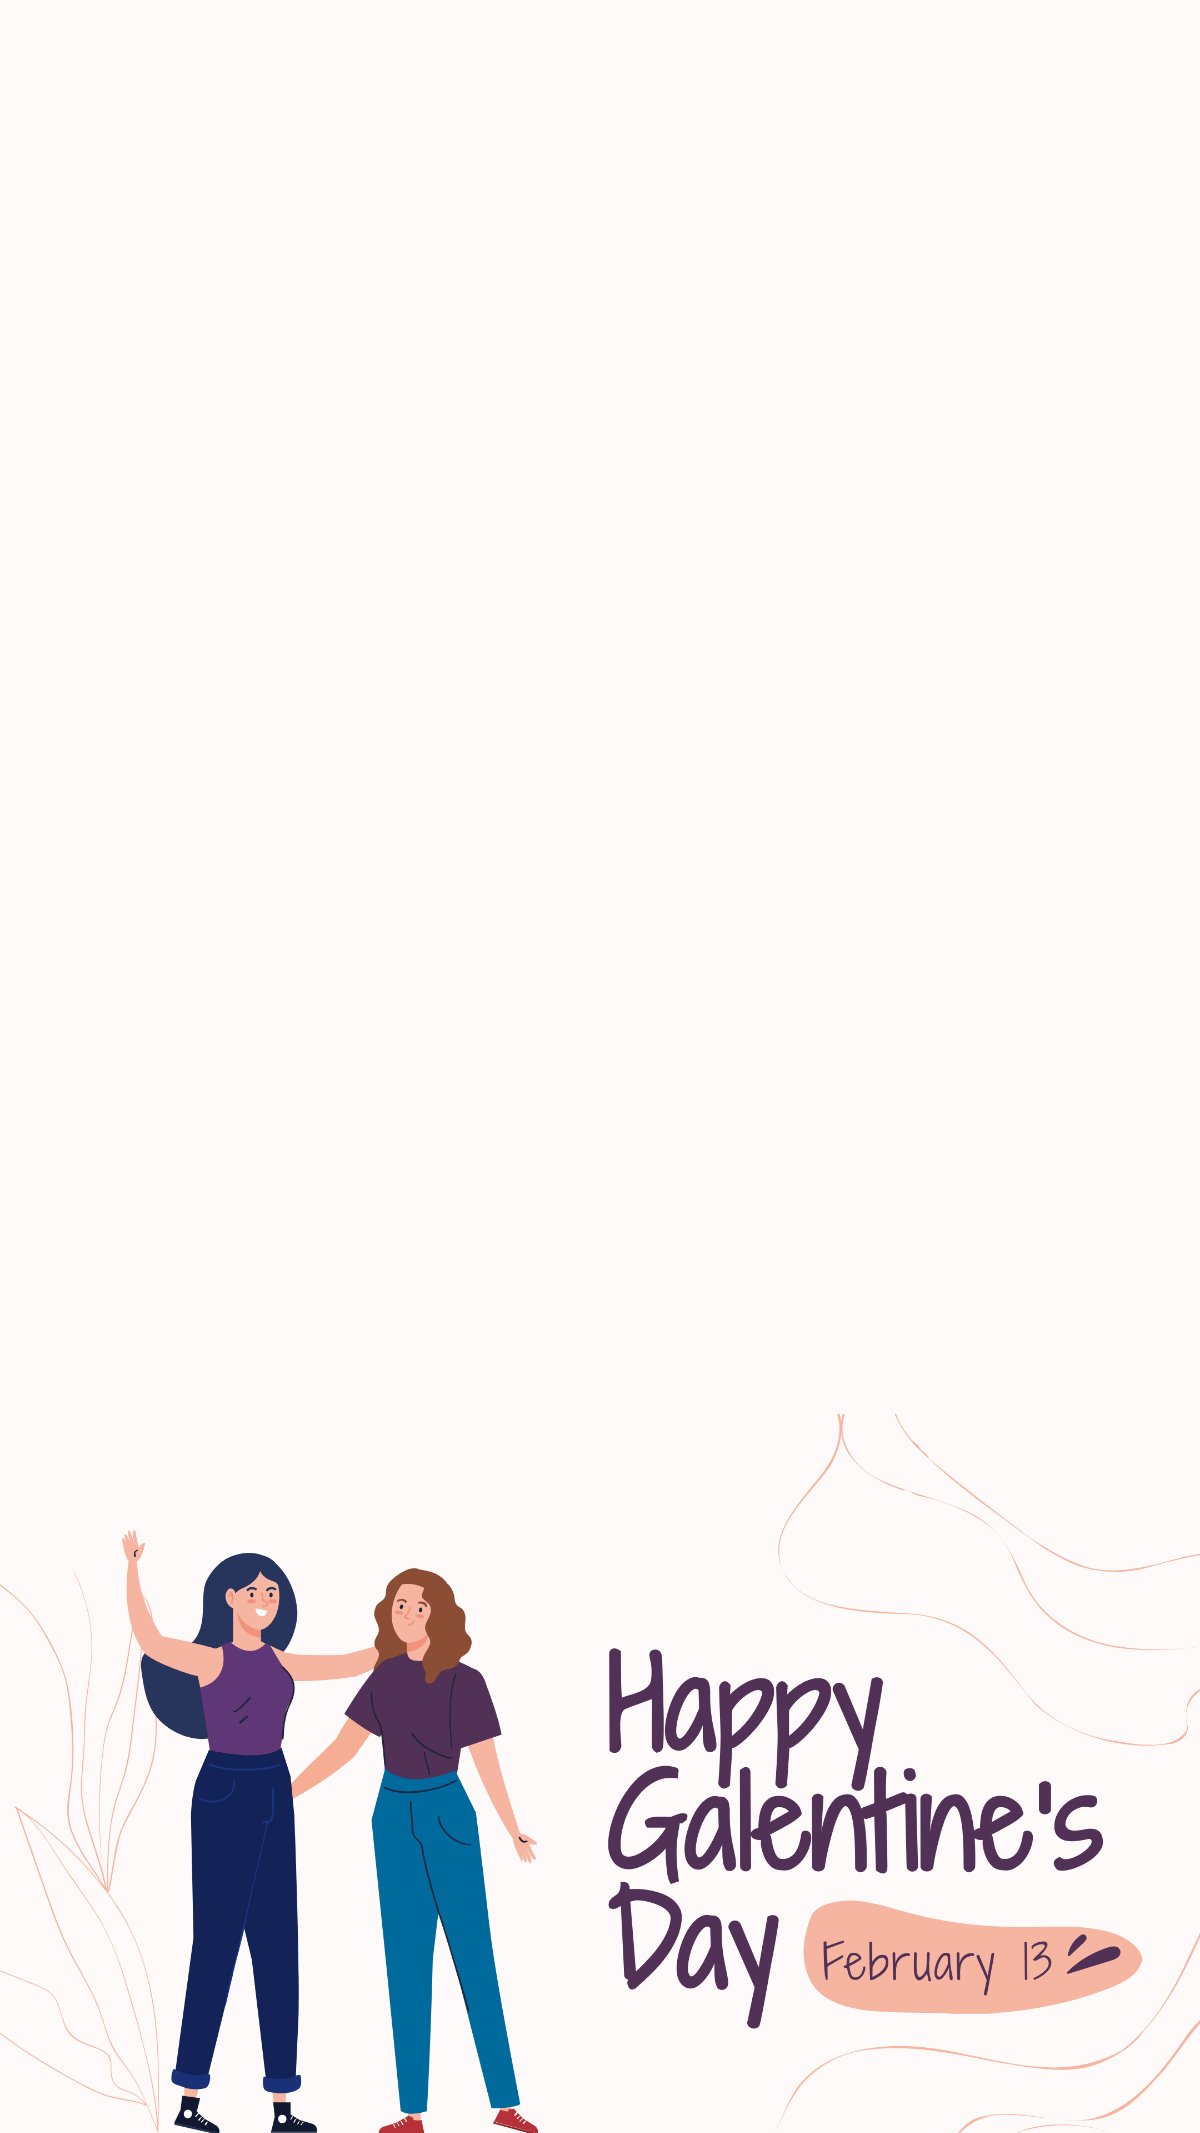 Free Happy Galentines Day Snapchat Geofilter Template